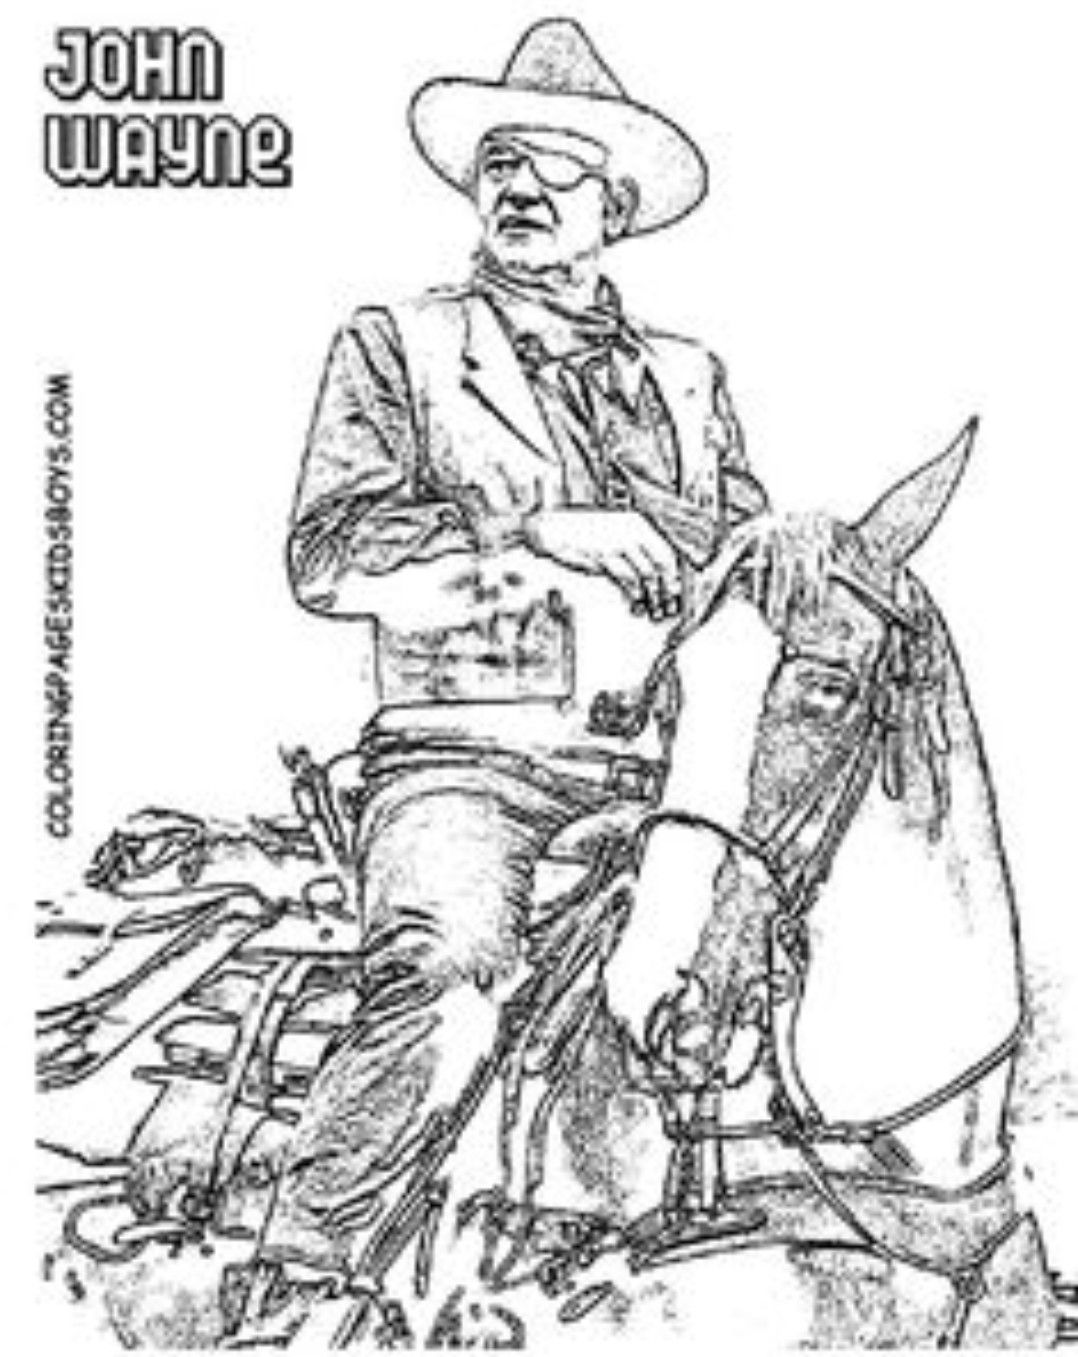 western-coloring-pages-for-adults-at-getcolorings-free-printable-colorings-pages-to-print